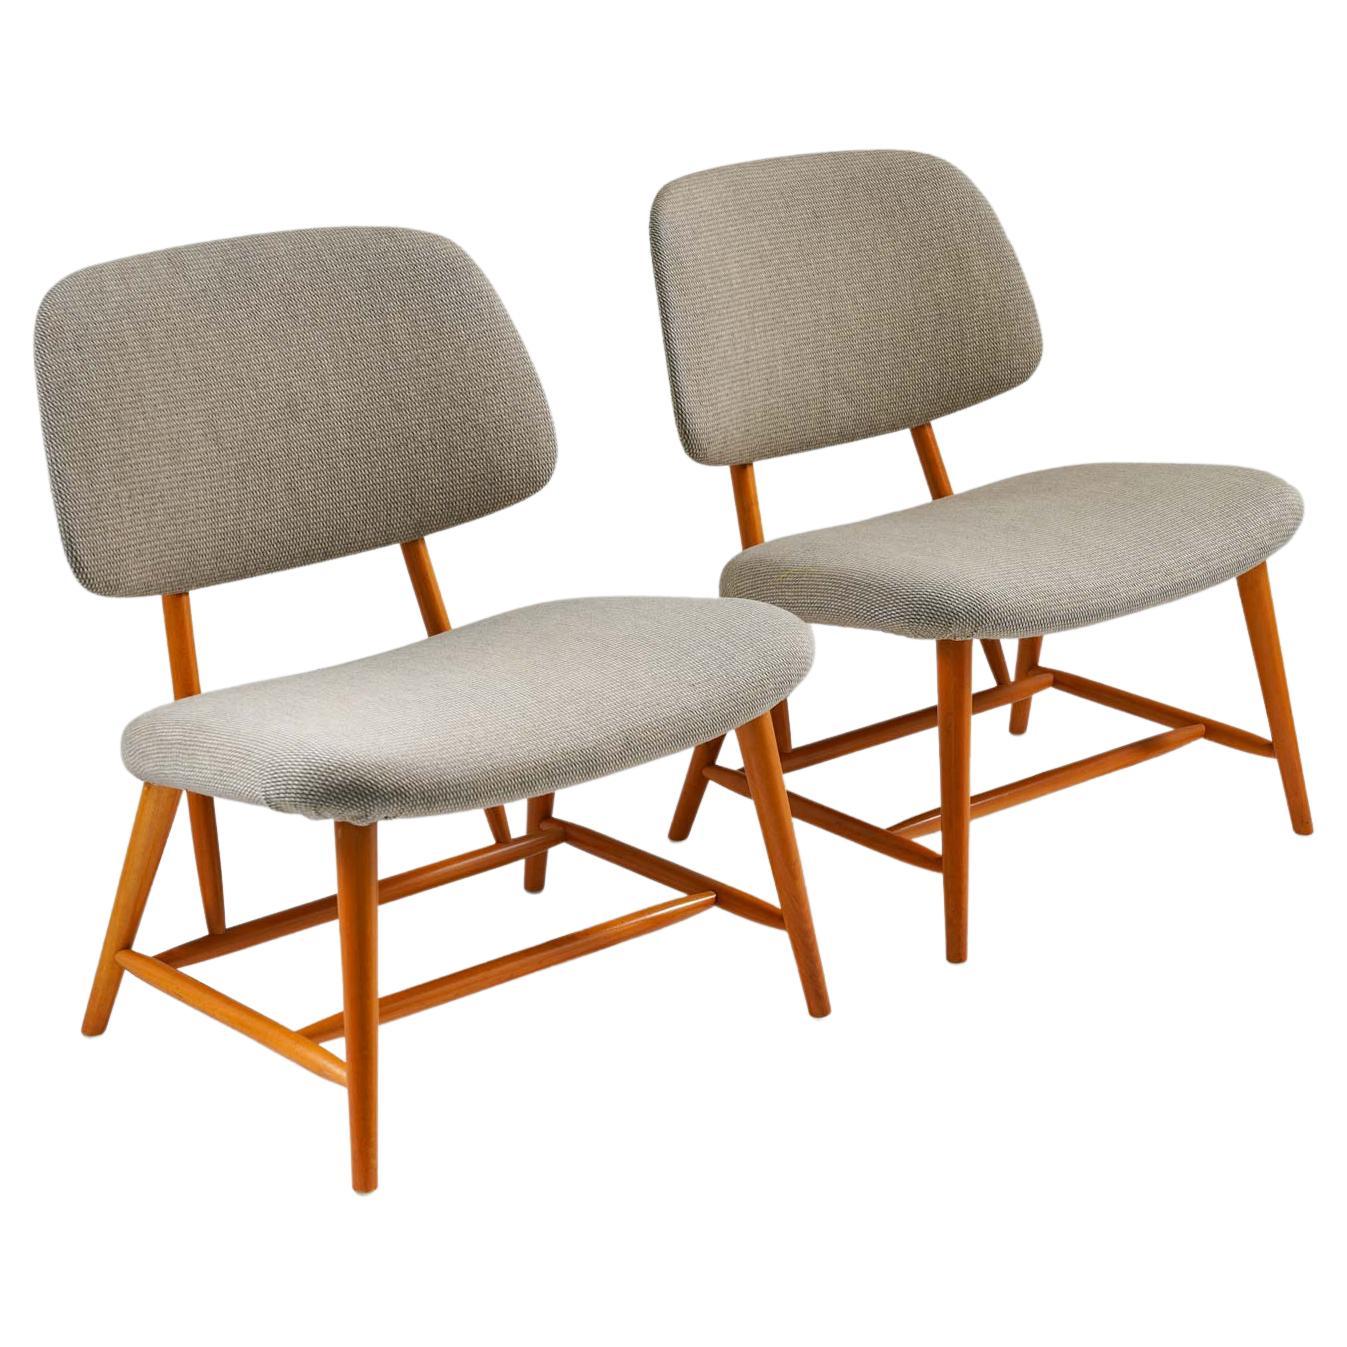 "Teve" Chairs by Alf Svensson for Ljungs Industrier, 1953